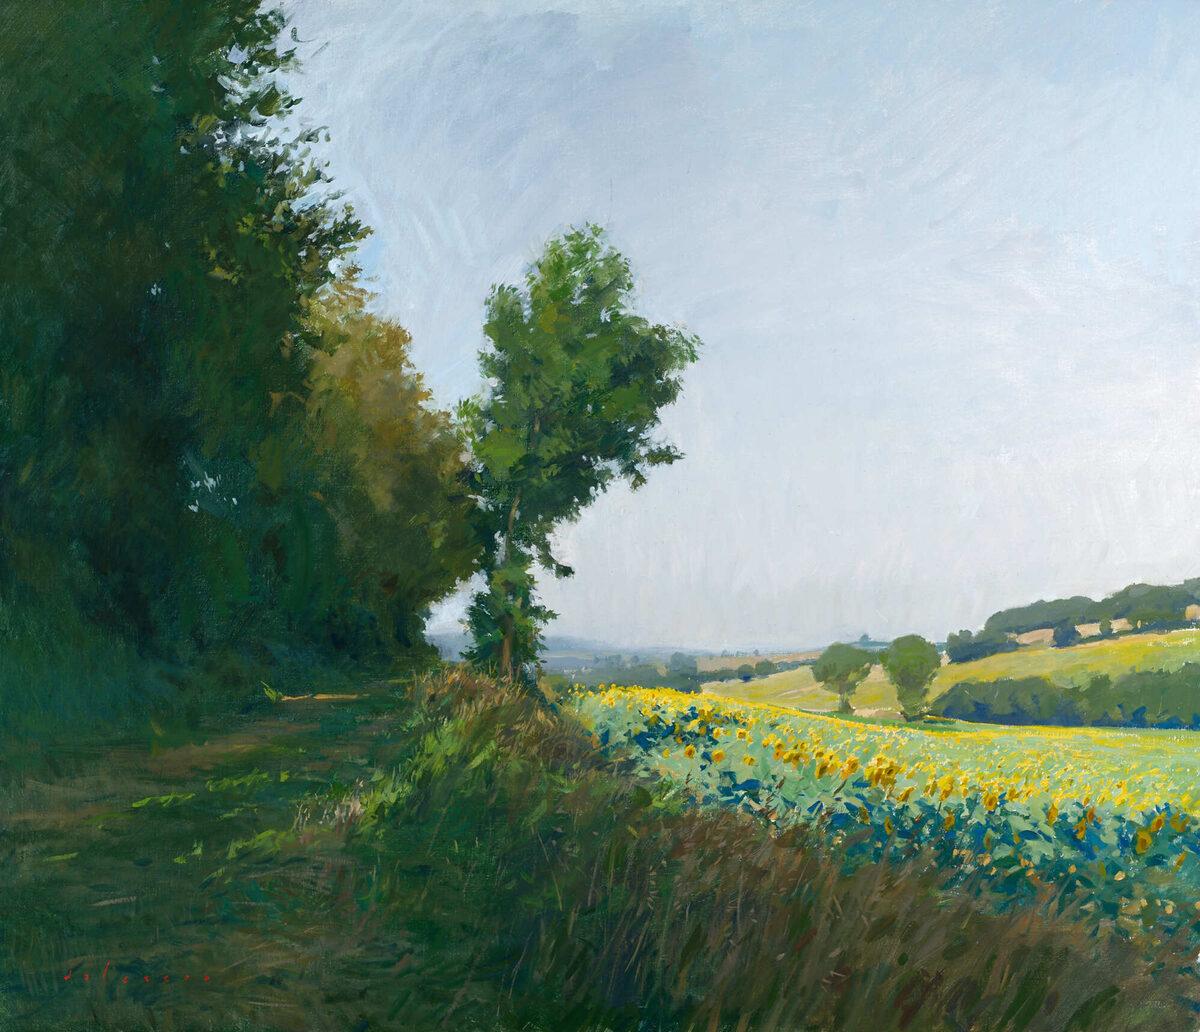 Marc Dalessio Landscape Painting - "Sunflowers Near Jegun" plein air oil painting of field in France, green, yellow